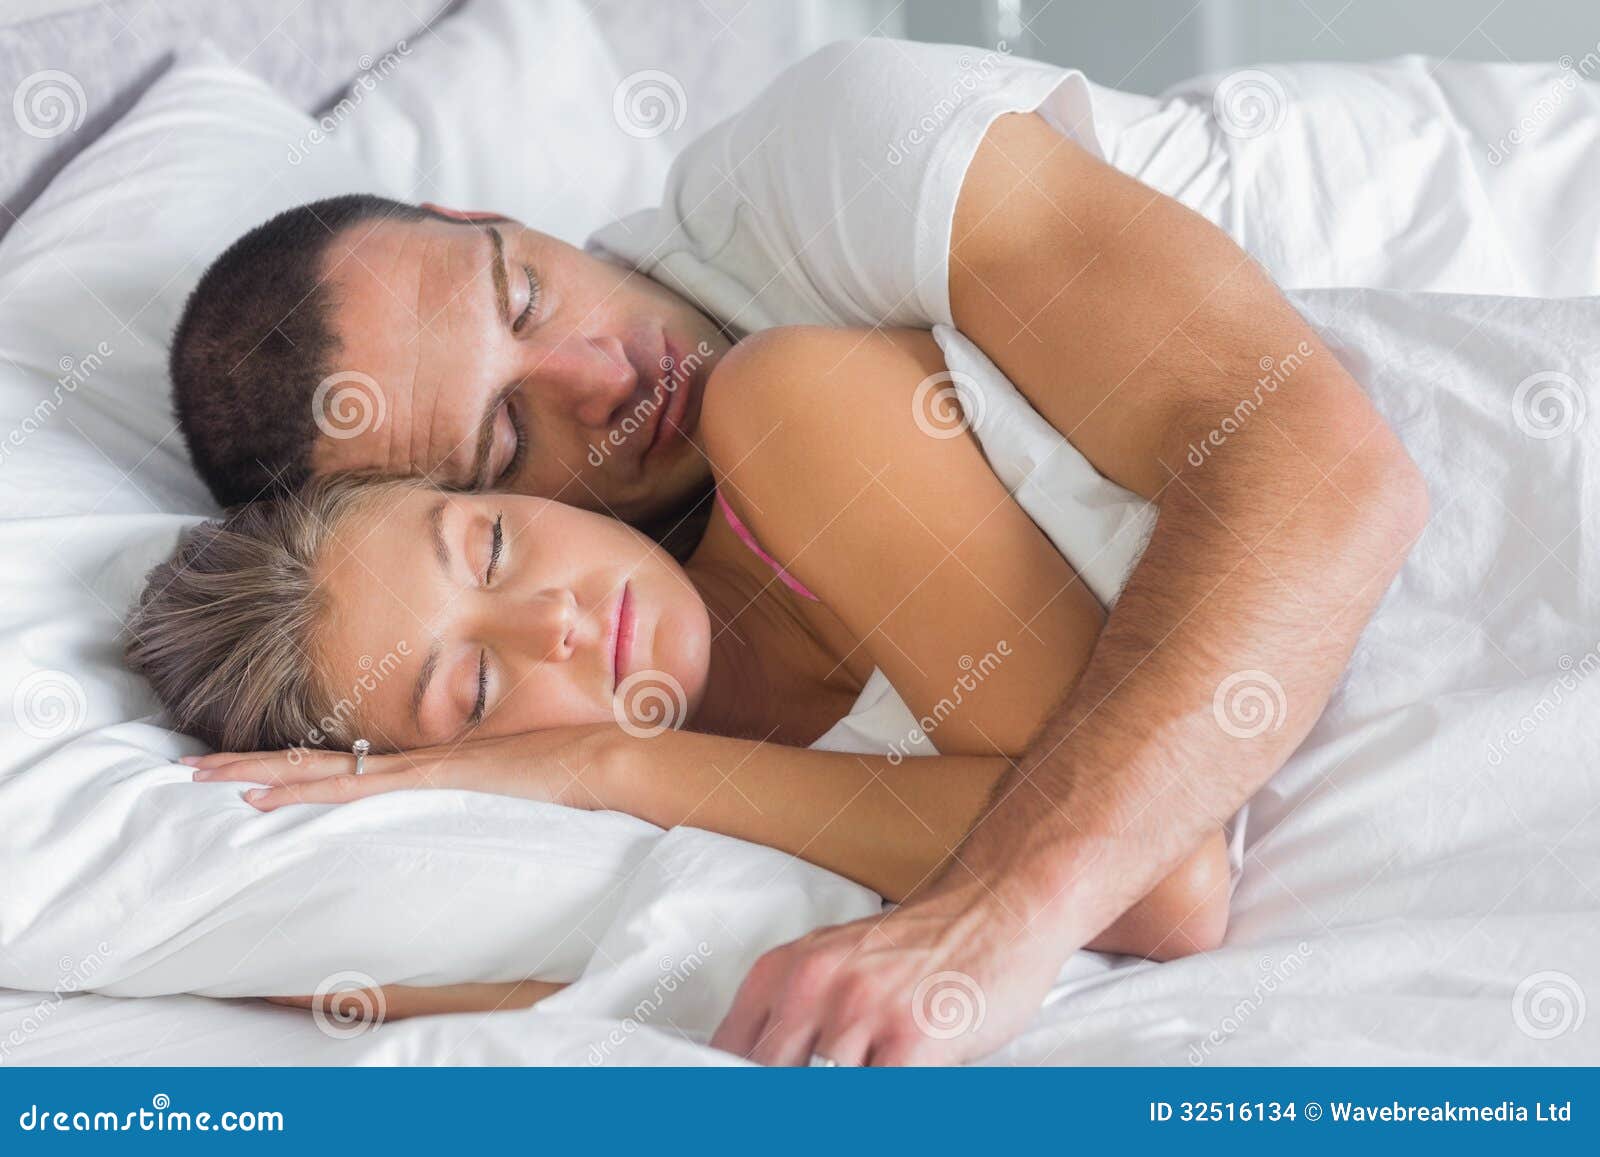 andrew mckissock reccomend cute pictures of couples cuddling pic